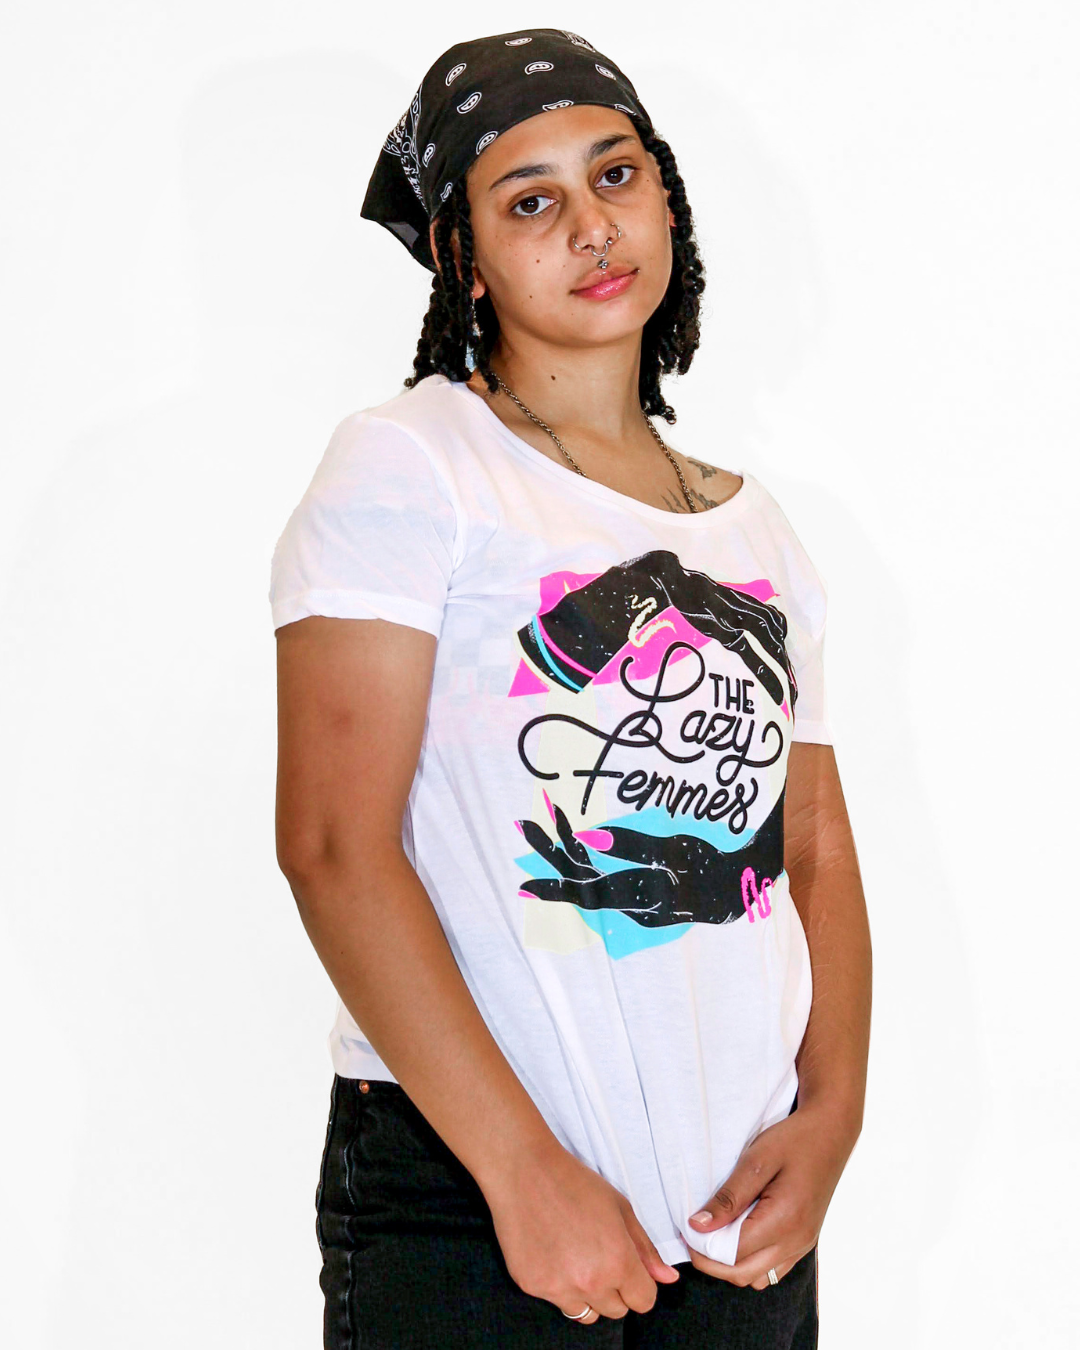 Model Grey is wearing The Lazy Femmes Band Tee in size S. They are 5'4" and their bra size is 32D. The tee is white with a multi-color graphic of two hands encircling the words "The Lazy Femmes" in black loopy cursive. The hands have neon pink, yellow, and blue accessories like nails, rings, and bracelets.